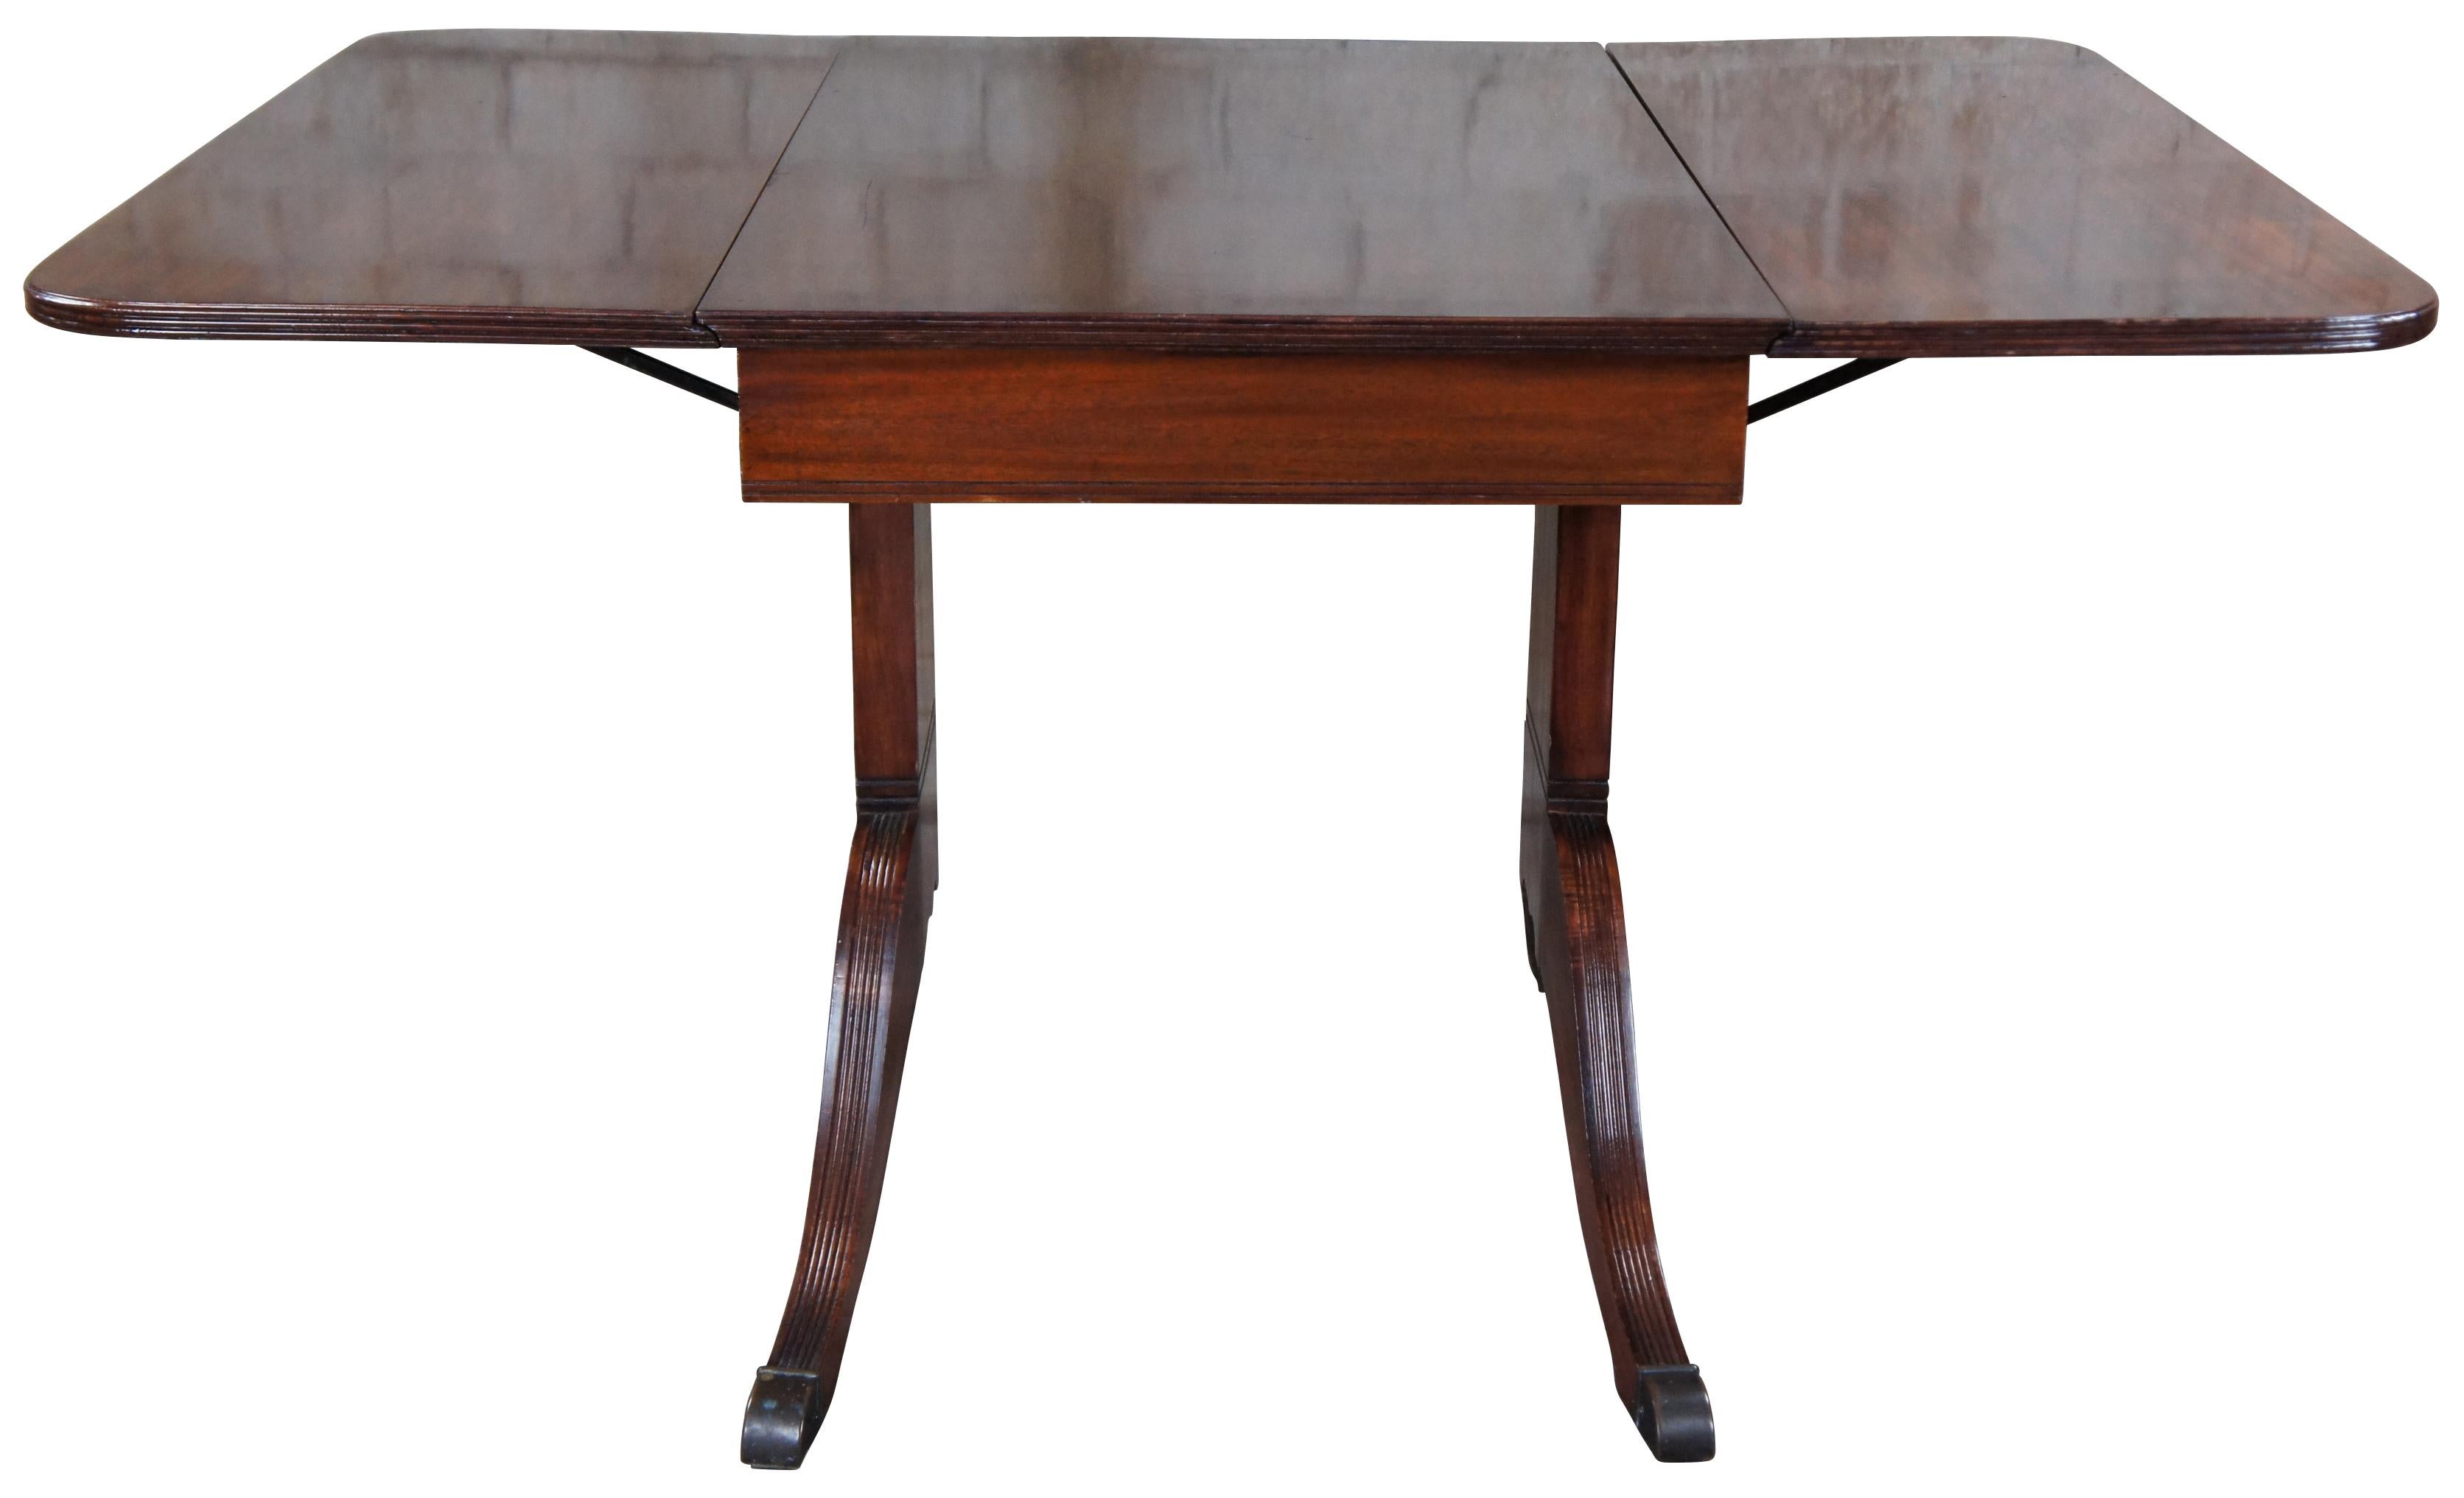 how much is a duncan phyfe table worth